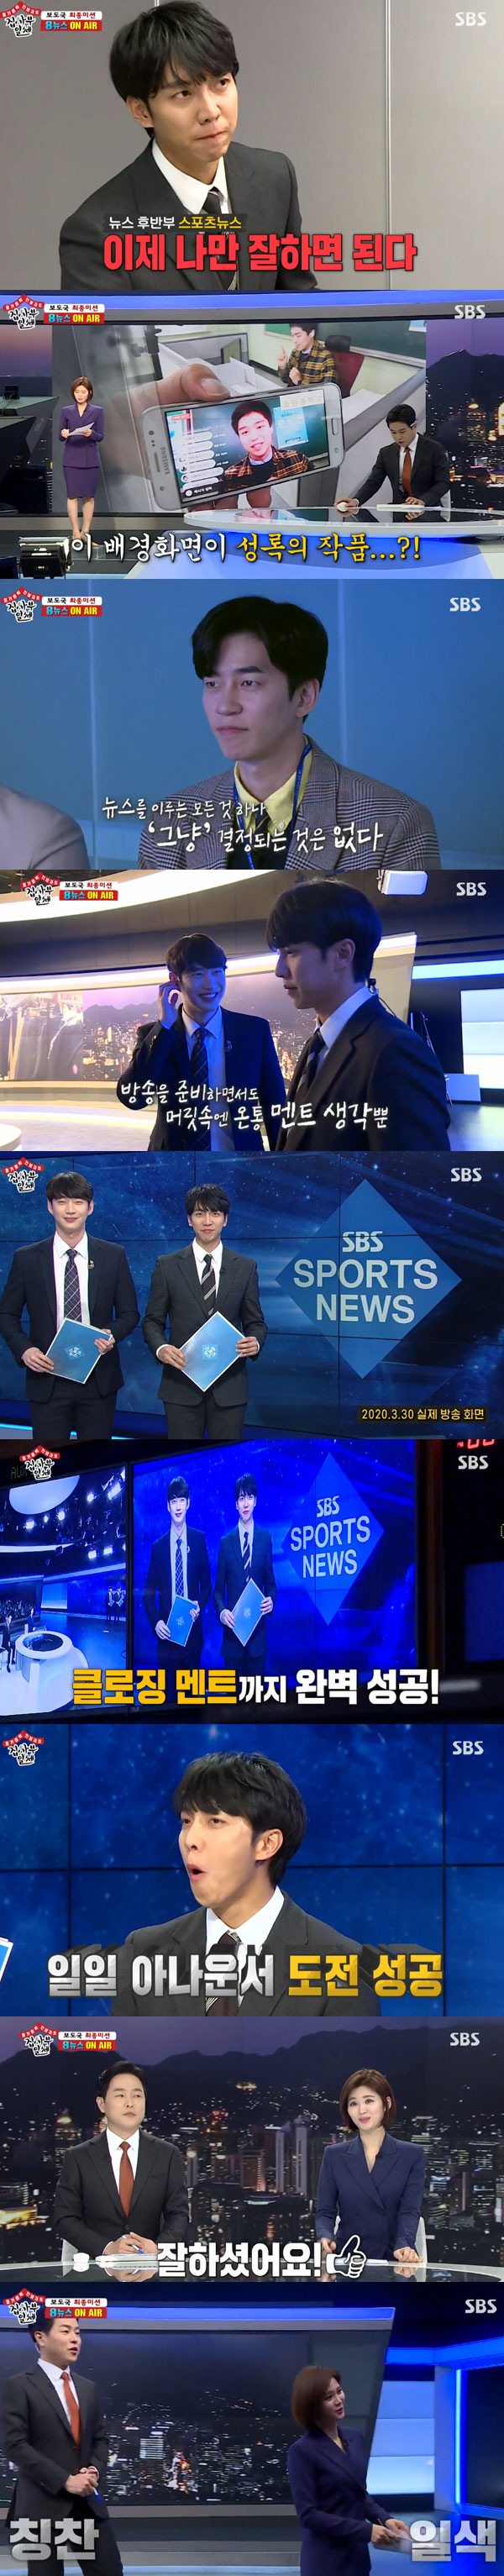 On SBS All The Butlers broadcast on the 26th, Lee Seung-gi, Shin Sung-rok, Yang Se-hyung, Cha Eun-woo and Kim Dong-Hyun were drawn to the masters office.On this day, daily announcer Lee Seung-gi started preparing for the exclusive closing of sports news.Shin Sung-rok was a daily CG team, Kim Dong-Hyun was a daily assistant, and Cha Eun-woo prepared daily radio news at that time.Lee Seung-gi moved to the studio to prepare for rehearsals, causing a series of mistakes in tensions; as live time approached, the news studio became busy.The news started, and the first challenge of Cha Eun-woo began: a radio relay team that became busy as the first news went out.Cha Eun-woo fully digested the English interview that was embarrassed during practice and delivered the next news properly.The next was Lee Seung-gi. The news was ready, but the whole thing was a thought. Sports news began with signal music.With everyone paying attention, Lee Seung-gi finished the standby; Lee Seung-gi was perfectly successful until the closing moment, nervous until the moment of the cut.After the broadcast was completed, anchor Kim Hyun-woo said, I did well. I think I can replace Yoon Sang-tae right away.The final gateway to the job was a final interview: The pre-mission they received was Editing the All The Butlers Opening.The first video edited by Cha Eun-woo was released with Park Sung-hoons CP saying, There is no correct answer but there is a wrong answer.The interviewers nodded to the smooth editing, but the members laughed at the continuing Cha Eun-woo one-shot, saying, Its direct.Lee Seung-gis edit was then released; Lee Seung-gi, aka Cha Eun-woo, was invited by the Devils editorial; Kwak Seung-young, CP, said, I had a lot of expectations.What is the editing that Lee Seung-gi wants? But he laughed, If Lee Seung-gi comes out, we will do it.Kim Dong-Hyun deleted all the openings and laughed at the appearance of the person who appeared.The second final interview was a lecture. First, Shin Sung-rok tried to get involved and called actor Han Ji-min. Han Ji-min laughed when he said, Stop talking for a while.Shin Sung-rok has begun to increase his persuasive power by listening to his fellow actors. Han Ji-min admired him, saying, You are good at broadcasting.Shin Sung-rok appealed with earnestness, but Han Ji-min concluded the call saying, I will text you. In particular, Han Ji-min sent a Ya Inma emoticon to Shin Sung-rok after the call was completed.Cha Eun-woo called Yoo Hee-yeol. Cha Eun-woo tried to aggressively reconcile, saying, Where are you? And Yoo Hee-yeol laughed.After that, Yoo Hee-yeol finished the call with the words I am not confident that I will do well.The two brothers tried to get a job with Baek Jong-won, who refused, saying, I want to take you as a master. But Yang said, I wonder what kind of master I am.I donated, but I want to learn that. Baek Jong-won said, I will be persuaded. I will come to my house next week. Kim Dong-Hyun called actor Ma Dong-Seok.Ma Dong-Seok said, I saw Donghyun coming out, he said. I am resting while preparing for the movie Crime City 2.At that time, Kim Dong-Hyun, The driving force, said, When is the time? Ma Dong-Seok said, Nowadays, you have to be at home.Kim Dong-Hyun then said, All The Butlers shoots at home, and Ma Dong-Seok was embarrassed that its really hard to get out.Eventually, Ma Dong-Seok promised Kim Dong-Hyuns continued persuasion that he would make fun time when there is time.The last Lee Seung-gi called film director Bong Joon-ho, who said: No problem, no problem.I hope I can not be honest. But unfortunately, the phone is turned off. Lee Seung-gi eventually changed his strategy with a voice message.Who will be one of the five ready talents to be SBS?SBS Choi Young-in said, Lee Seung-gi is really skilled, but Cha Eun-woo has been growing. I am going to pick Cha Eun-woo because I have seniors.Cha Eun-woo cheered, but Lee Seung-gi expressed regret.But then Choi Young-in said, Skill is also important. I will hire Seung-gi as a career PD. It is a manager-level job for a newbie.